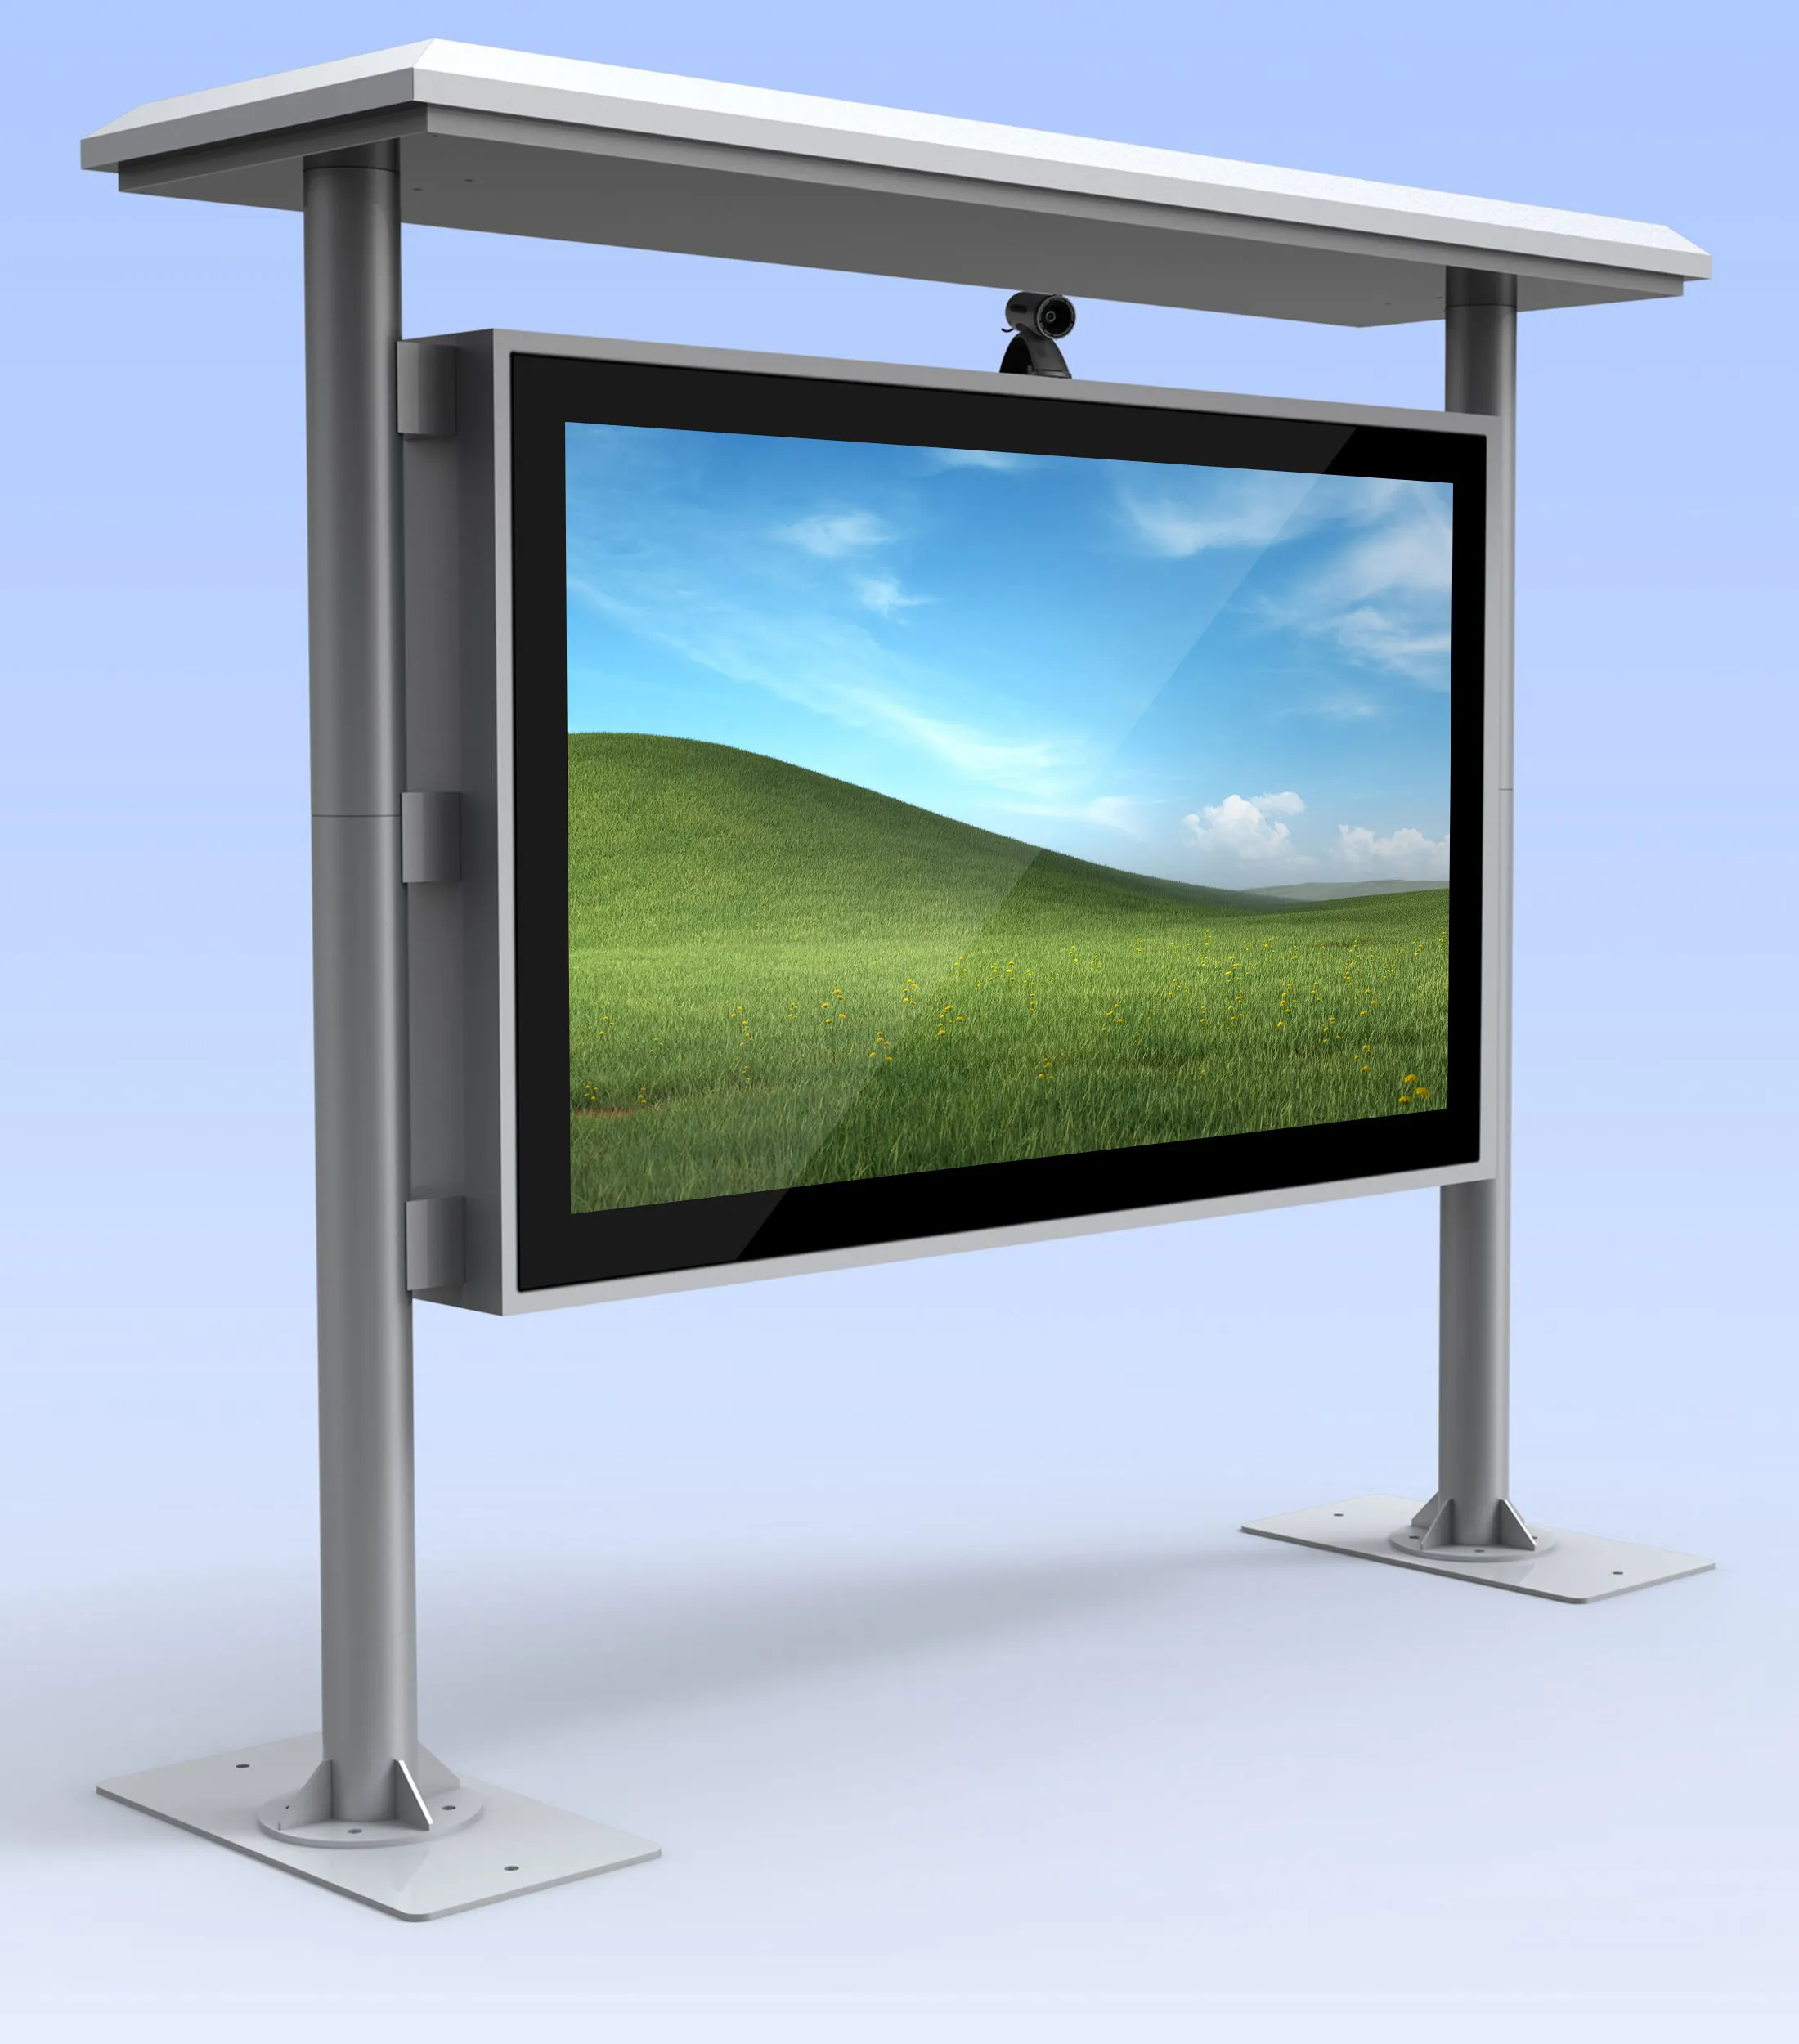 Outdoor 55 Inch LCD Advertising Machine Interactive Screen Advertising Kiosk For The Government/school